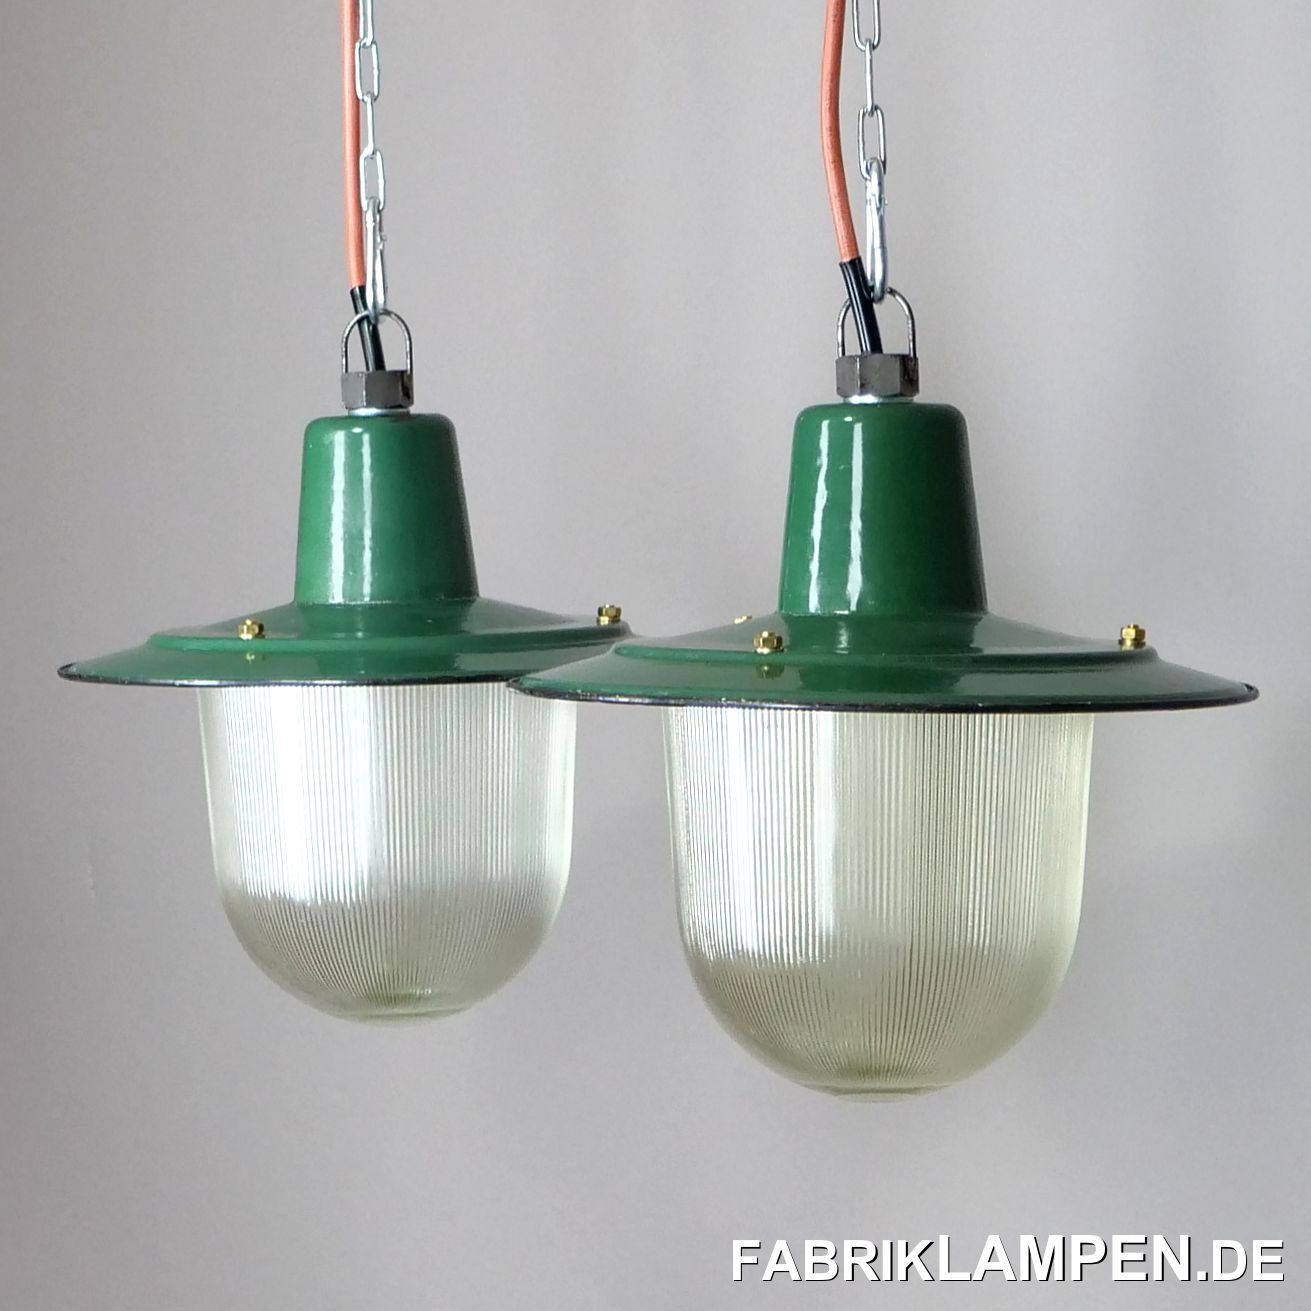  Old enamel factory lamps from the 1950s, a pair. Very rare variant with company logo on the enamel shade and protective glass. The heavy safety glass is ribbed.These beautiful factory lamps have some traces of the past decades, such as chipping, rust spots, scratches, discoloration and so on, making each lamp unique.The industrial lamps are restored: cleaned, preserved and re-electrified, with new E27 ceramic sockets.Material: green (inside white) enameled steel sheet, with protective glass.The lamps can also be used without glass, as open lamps.Dimensions: Height of the lamps about 28 cm (without suspension eye), diameter about 31.5 cm. Height of the shade only 12 cm.The old factory lamps are supplied with 2 meters of cable. For an extra charge, the lamps can also be supplied with chain or steel tube suspension. We can also offer canopies.2 pieces in stock, for sale only as a pair. 